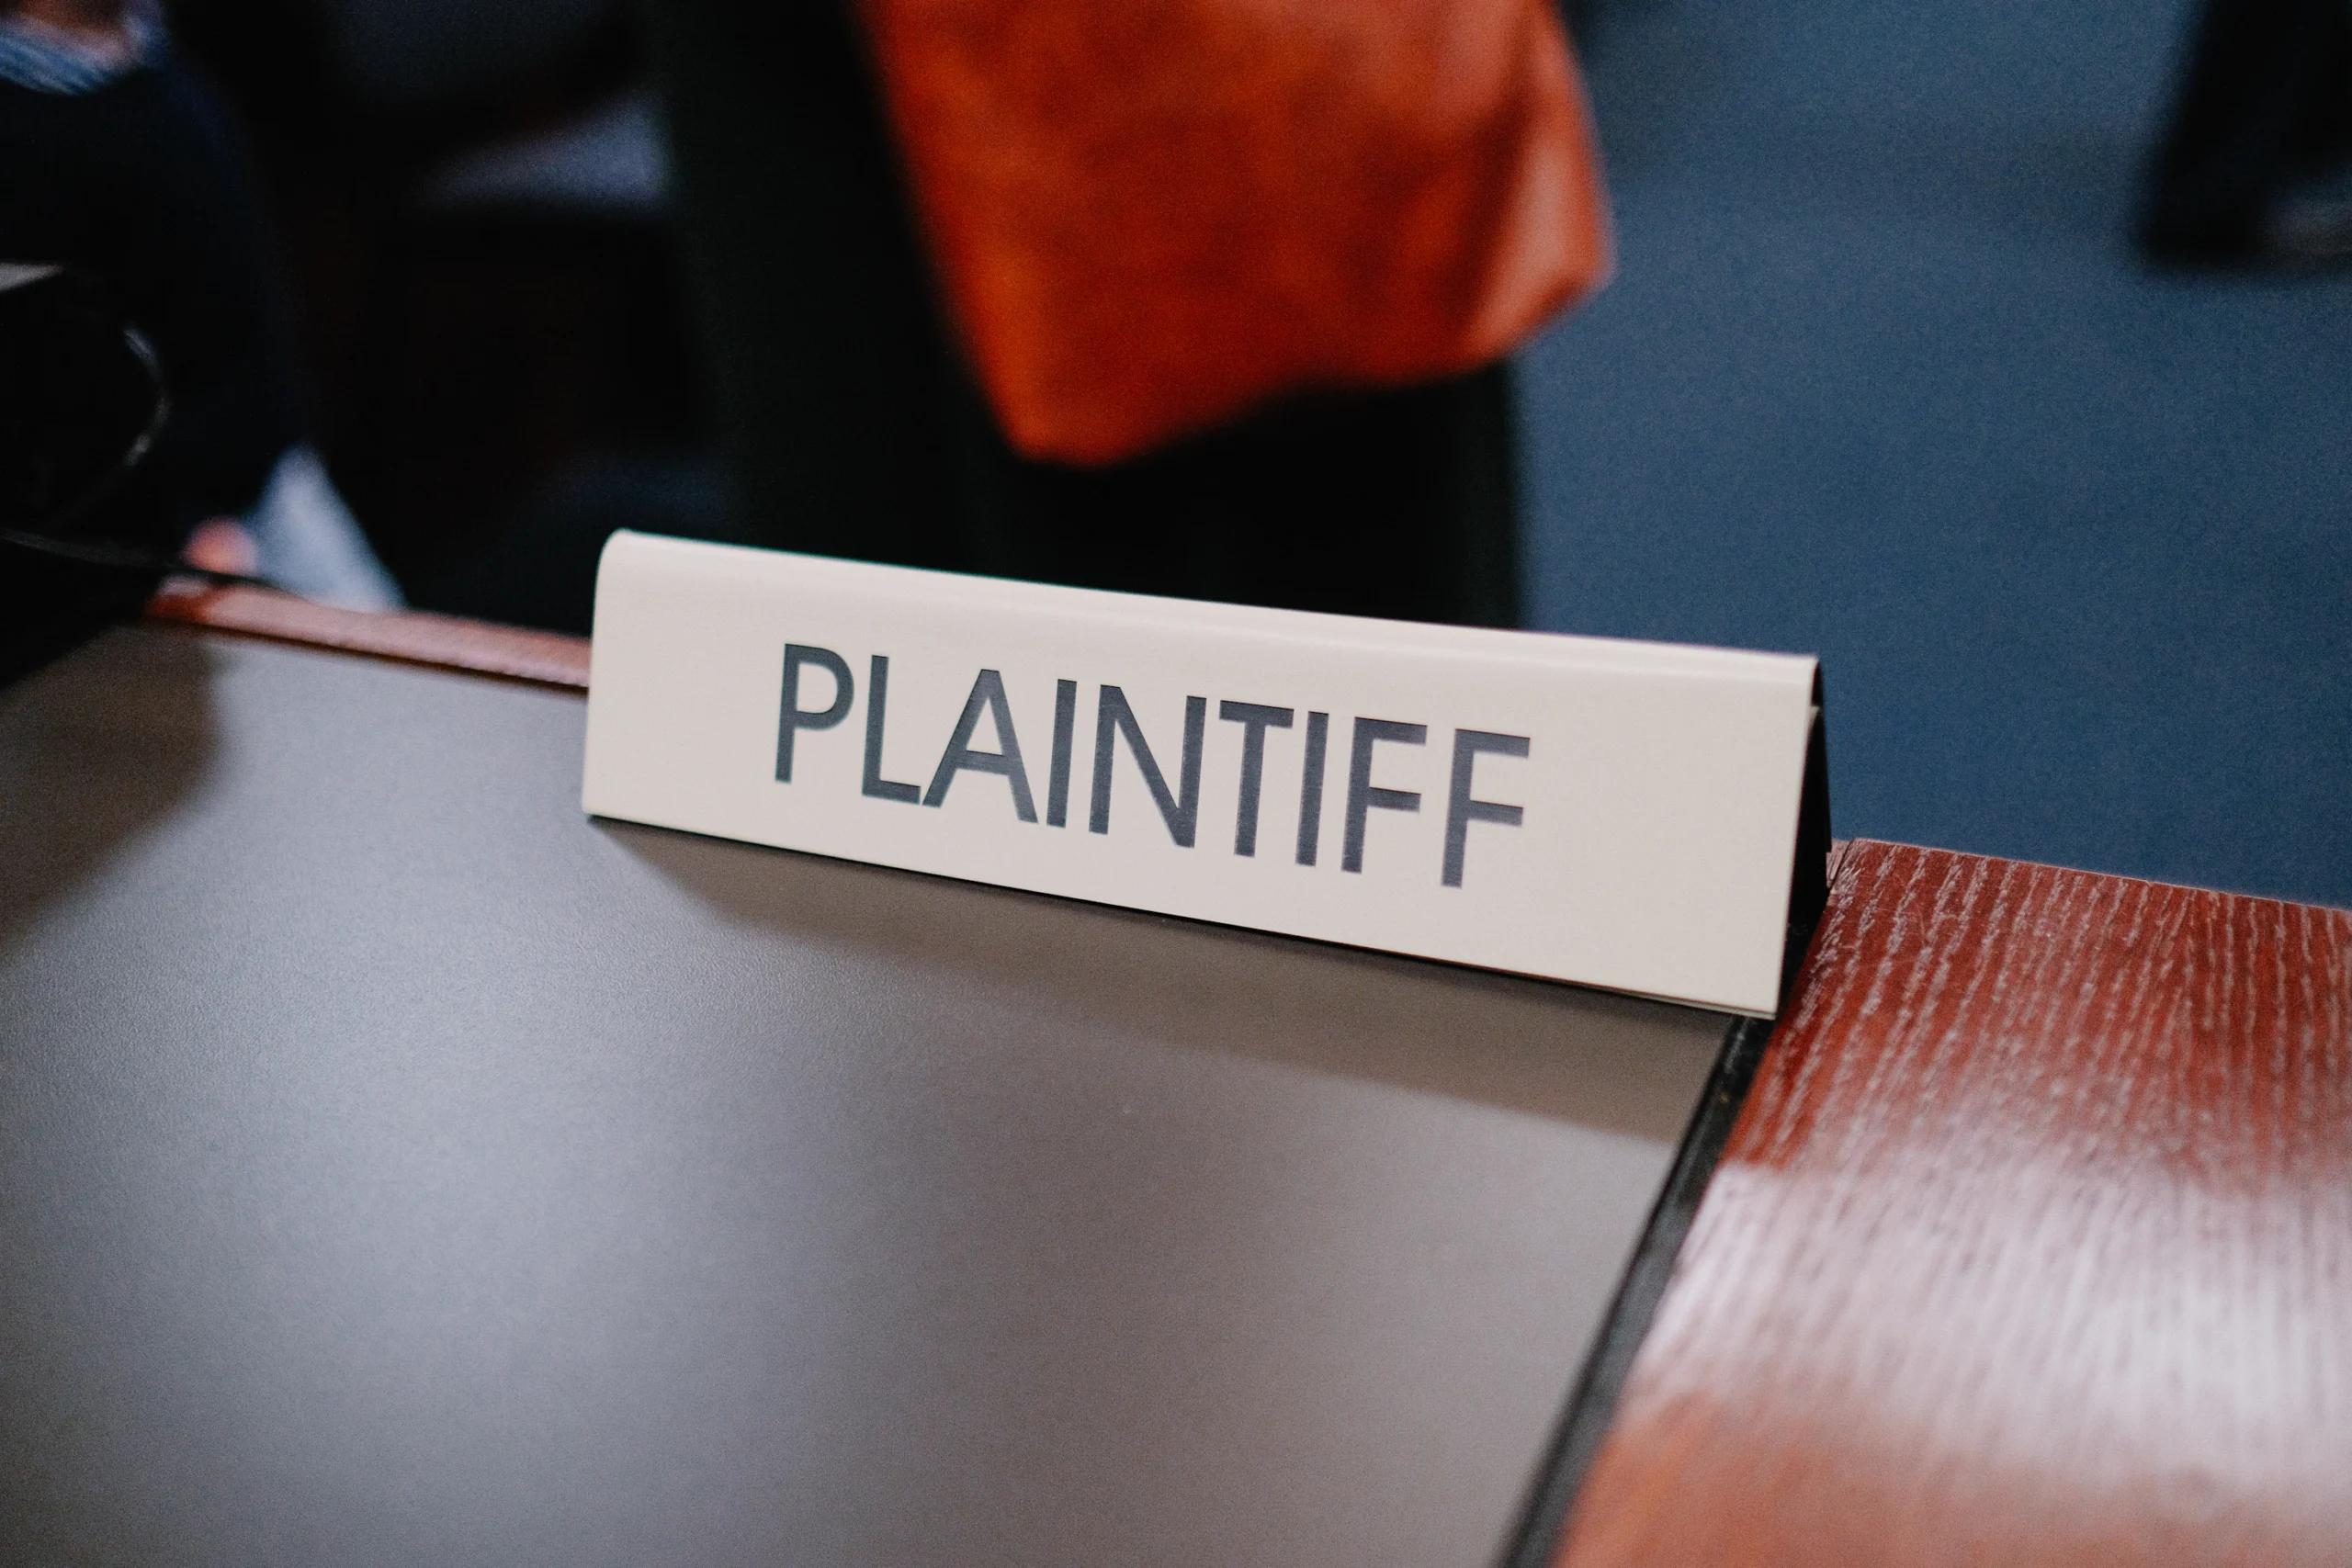 A close up of a sign that says "Plaintiff"